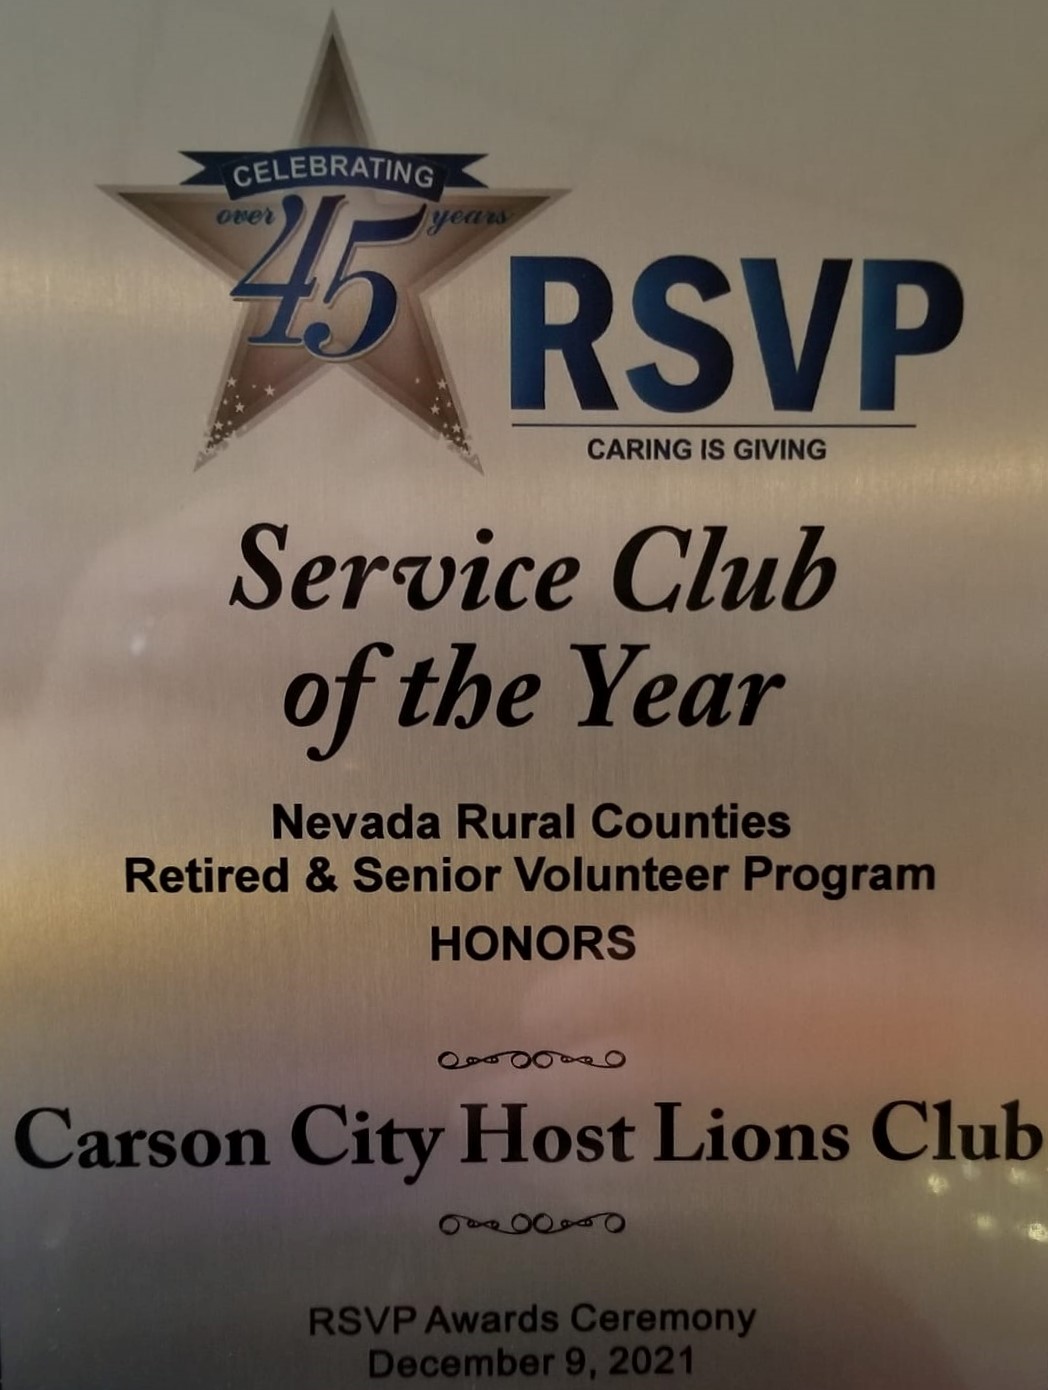 RSVP Service Club of the Year